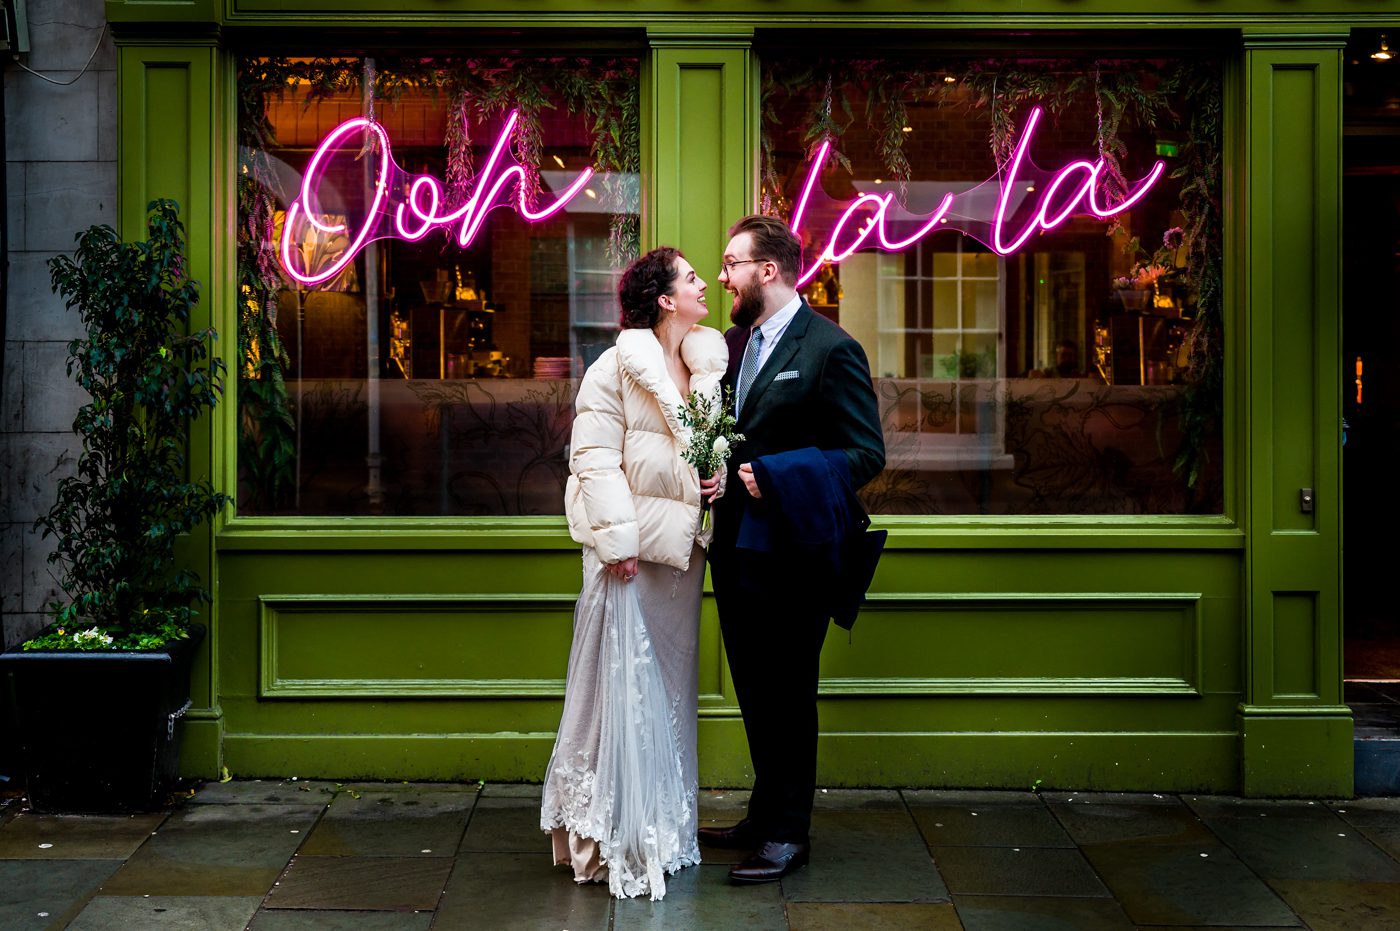 Wedding couple in front of neon sign